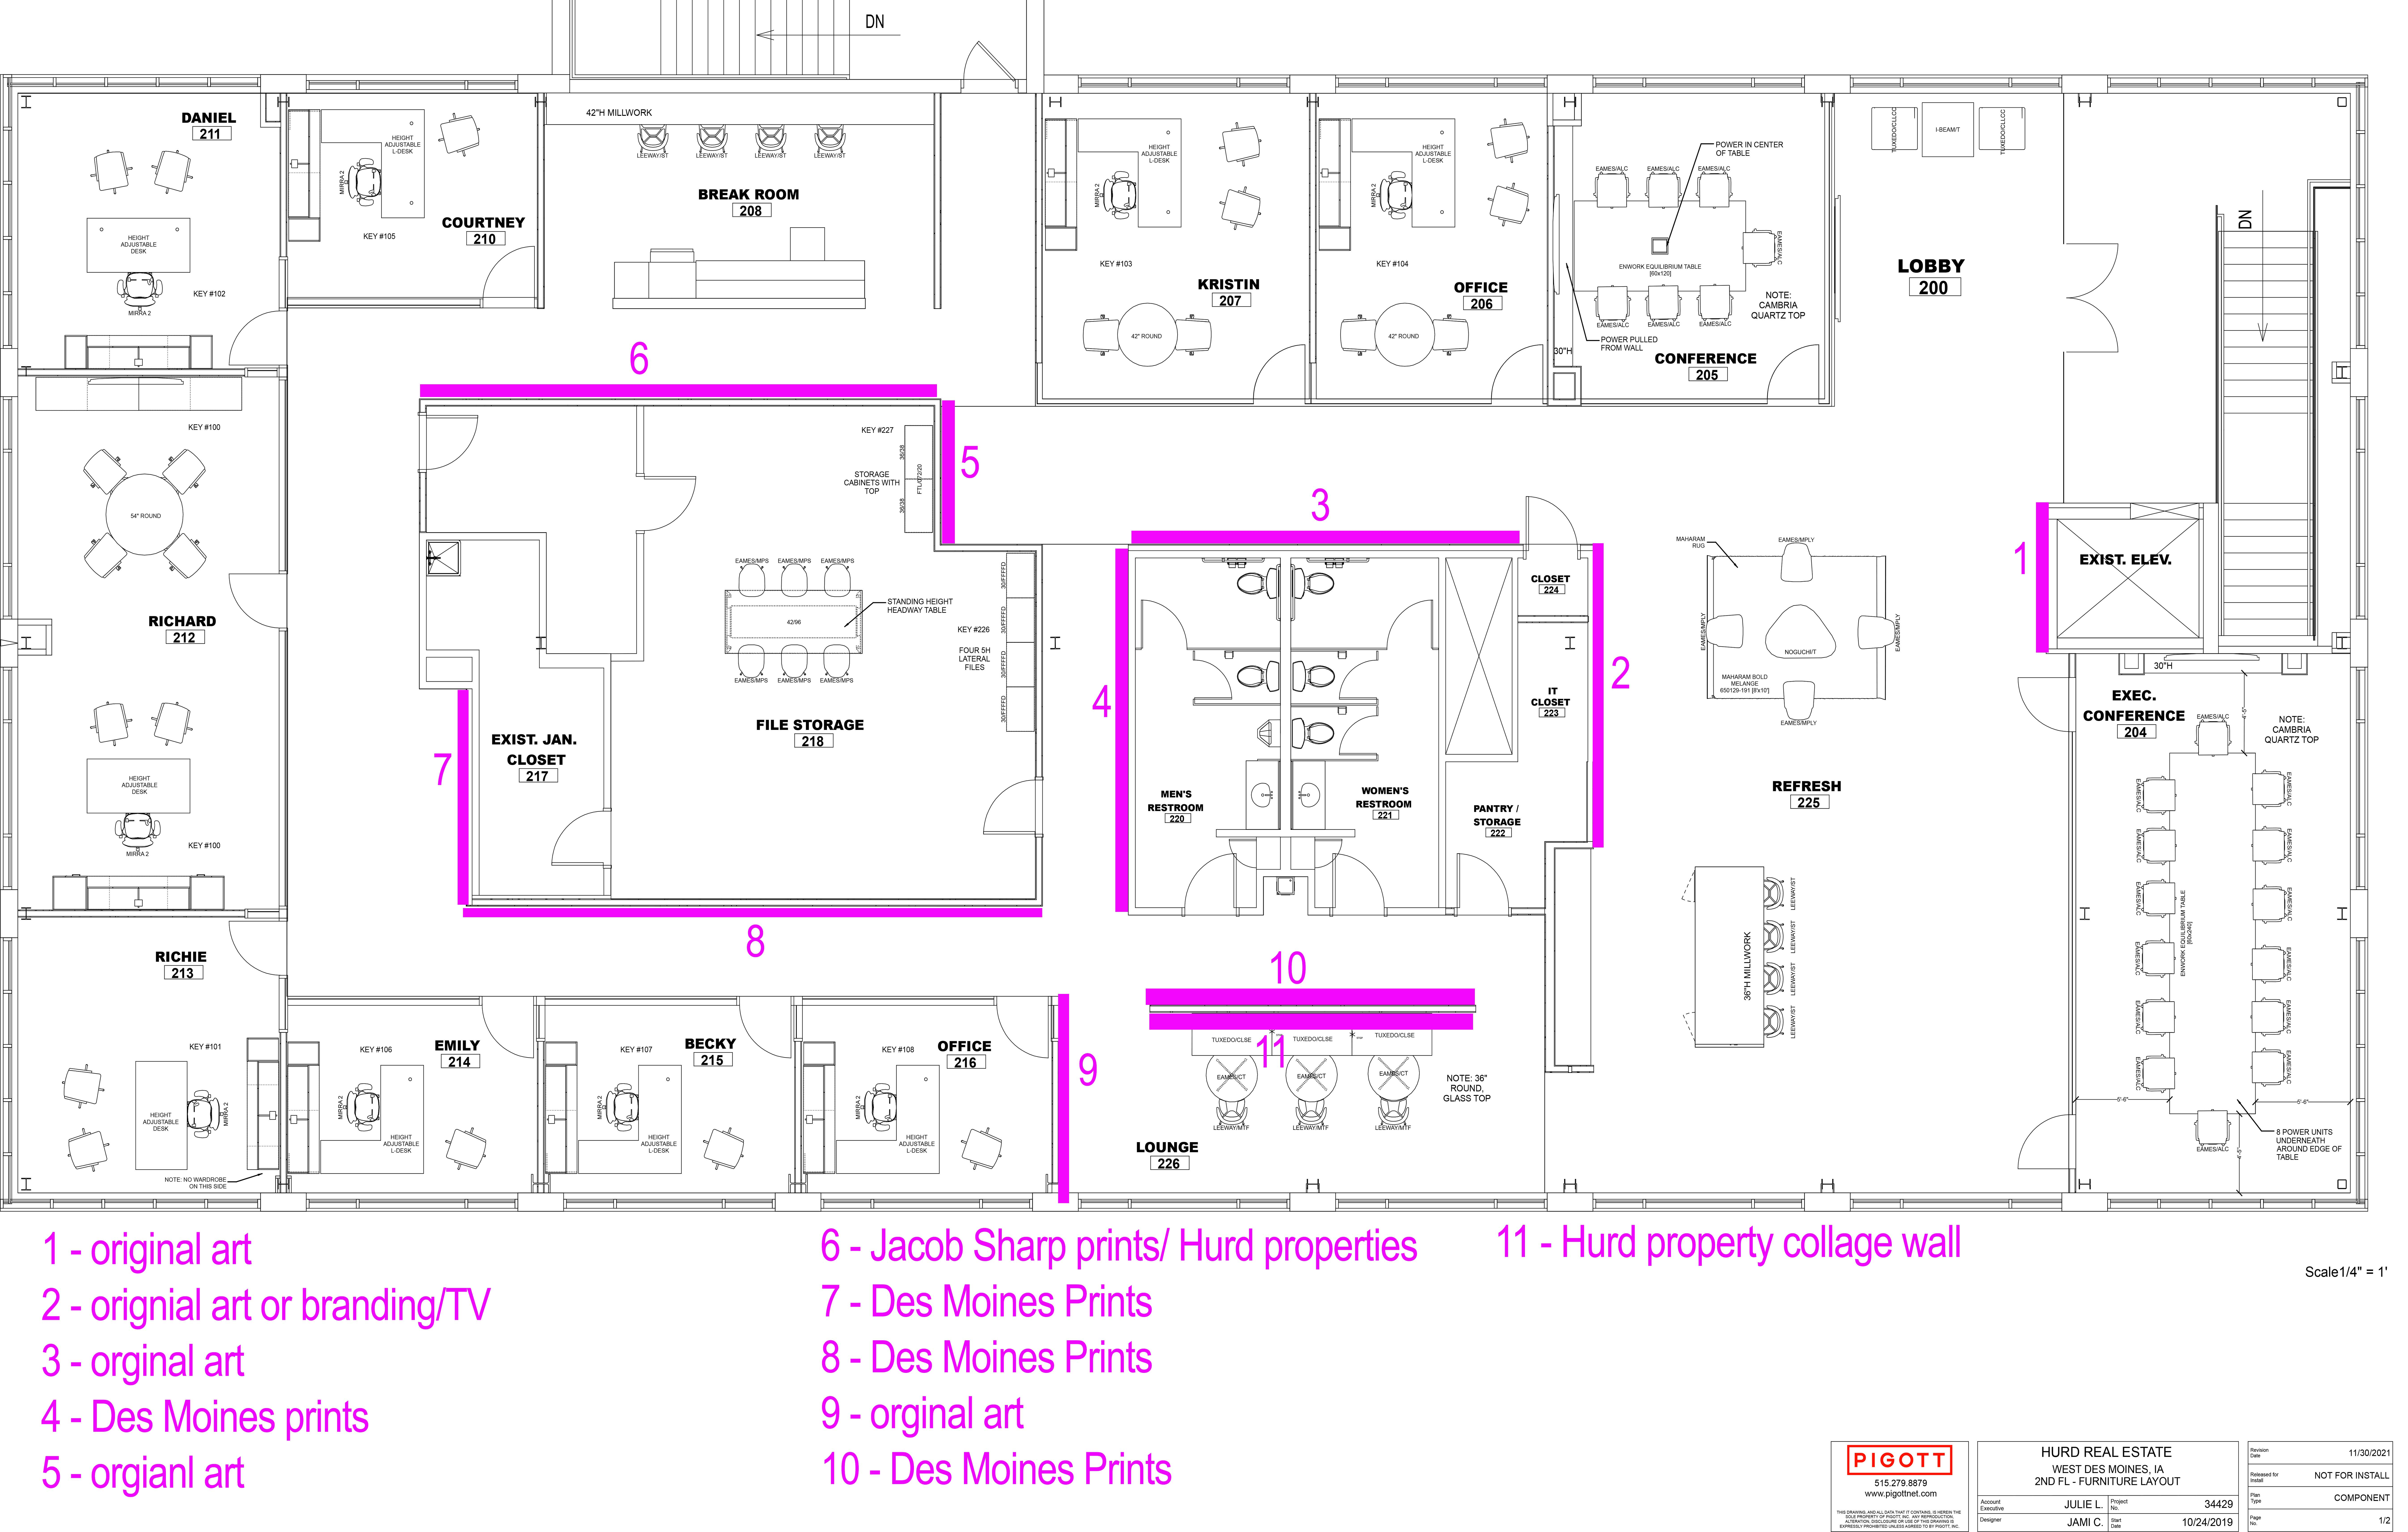 Hurd Realty New Office Art Layout and plan